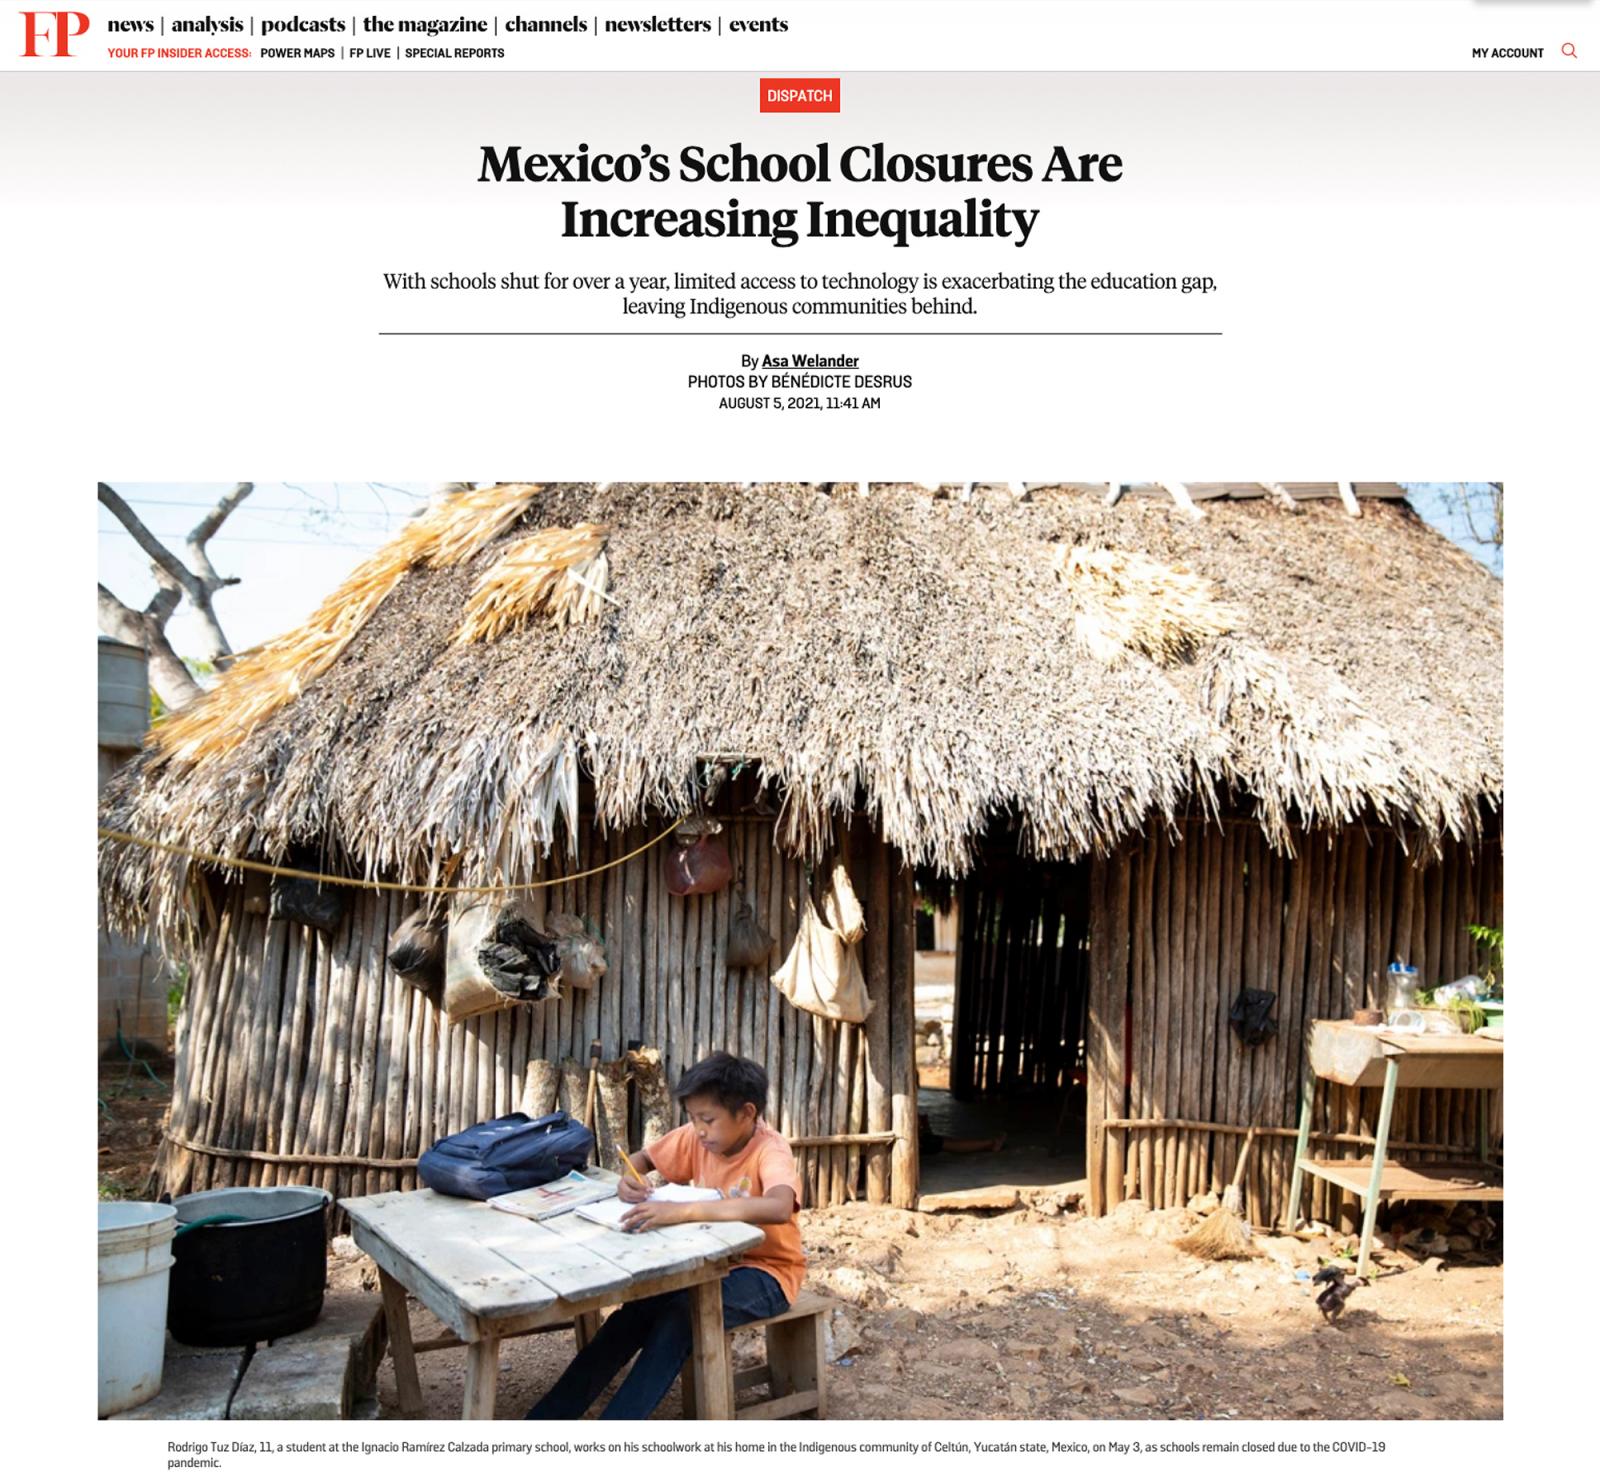 Publication in FOREIGN POLICY: "MEXICO'S SCHOOL CLOSURES ARE INCREASING INEQUALITY."